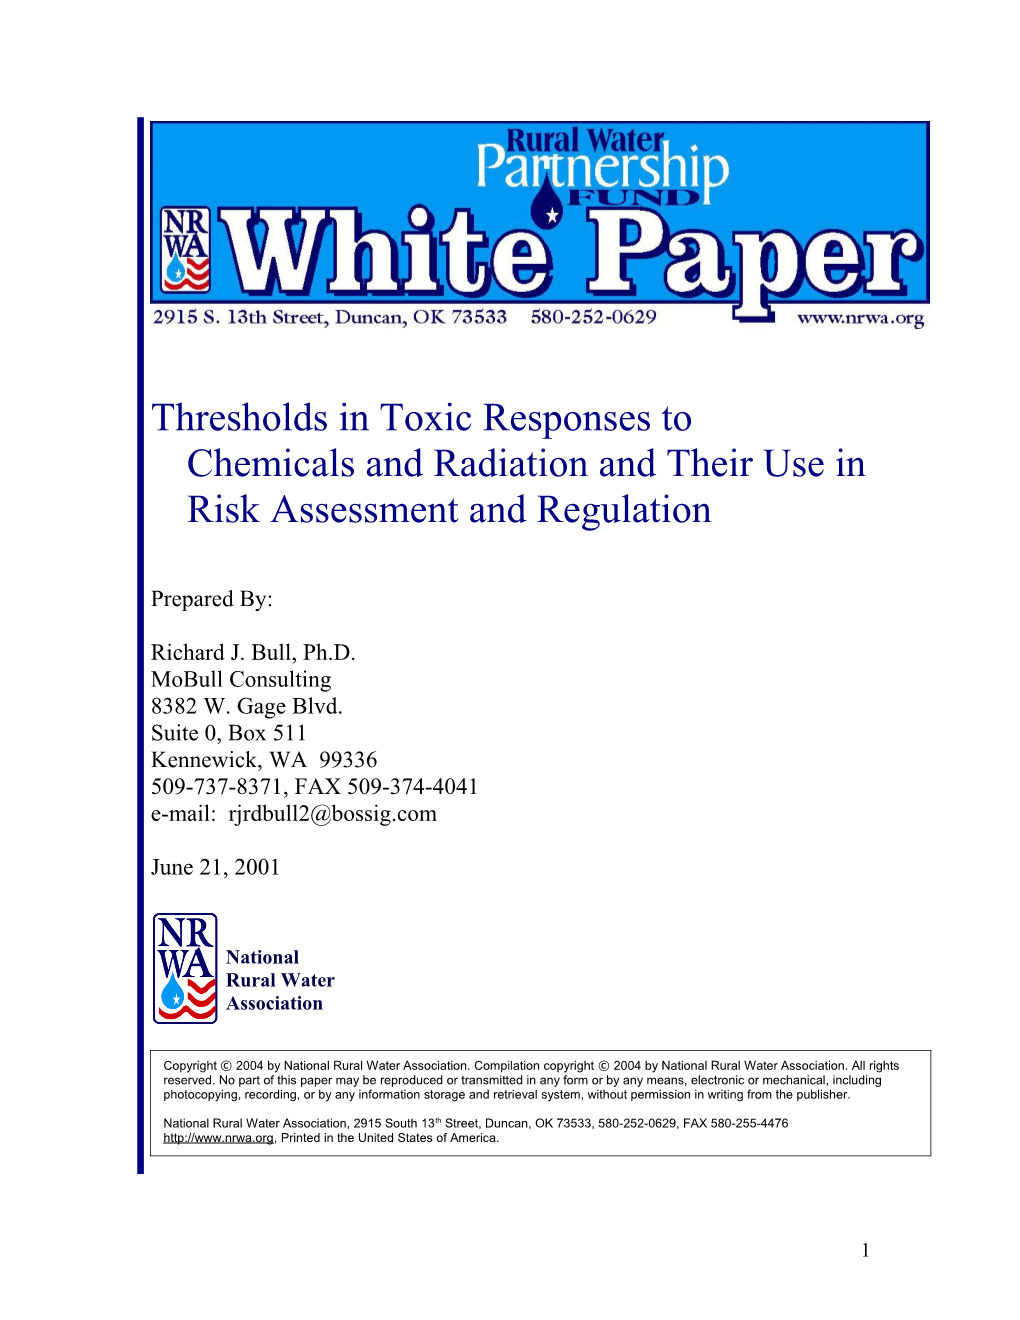 Thresholds in Toxic Responses to Chemicals and Radiation